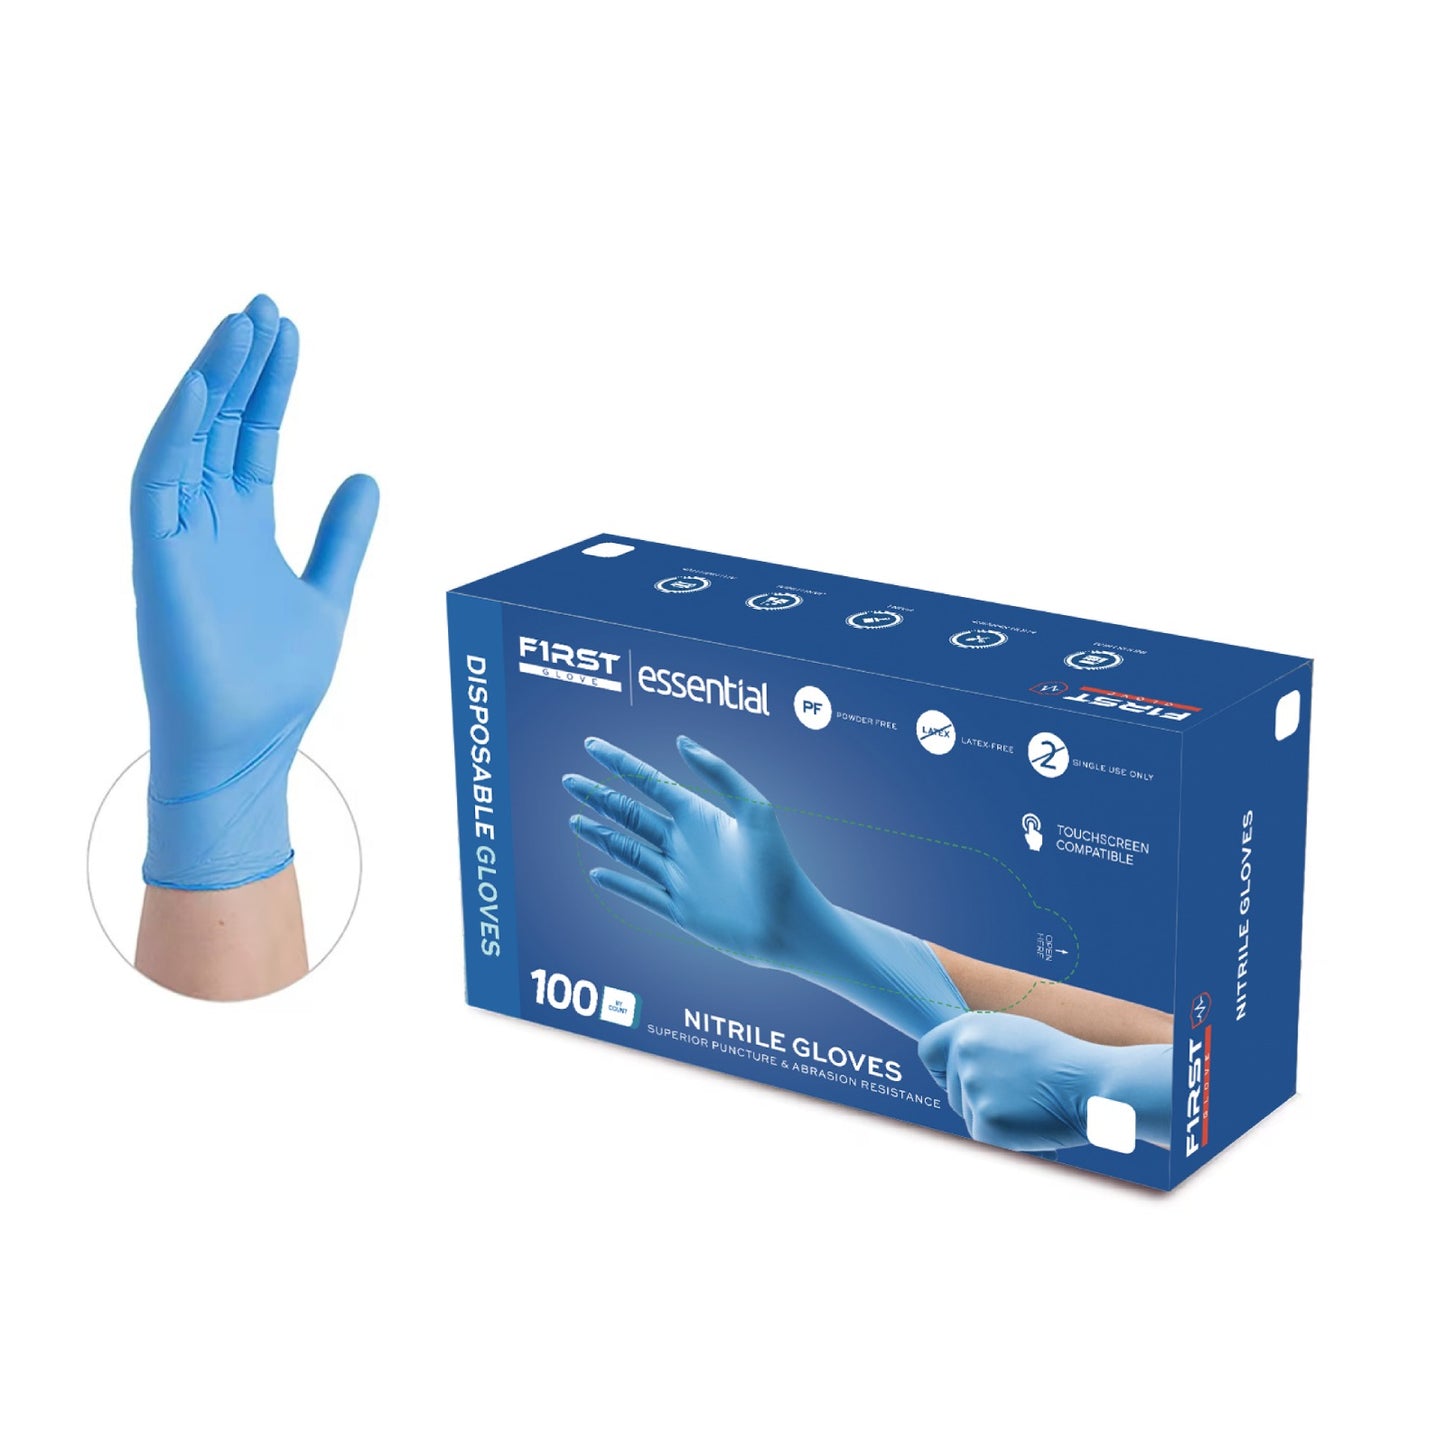 First Glove Essential 3 Mil Blue Nitrile Disposable Gloves